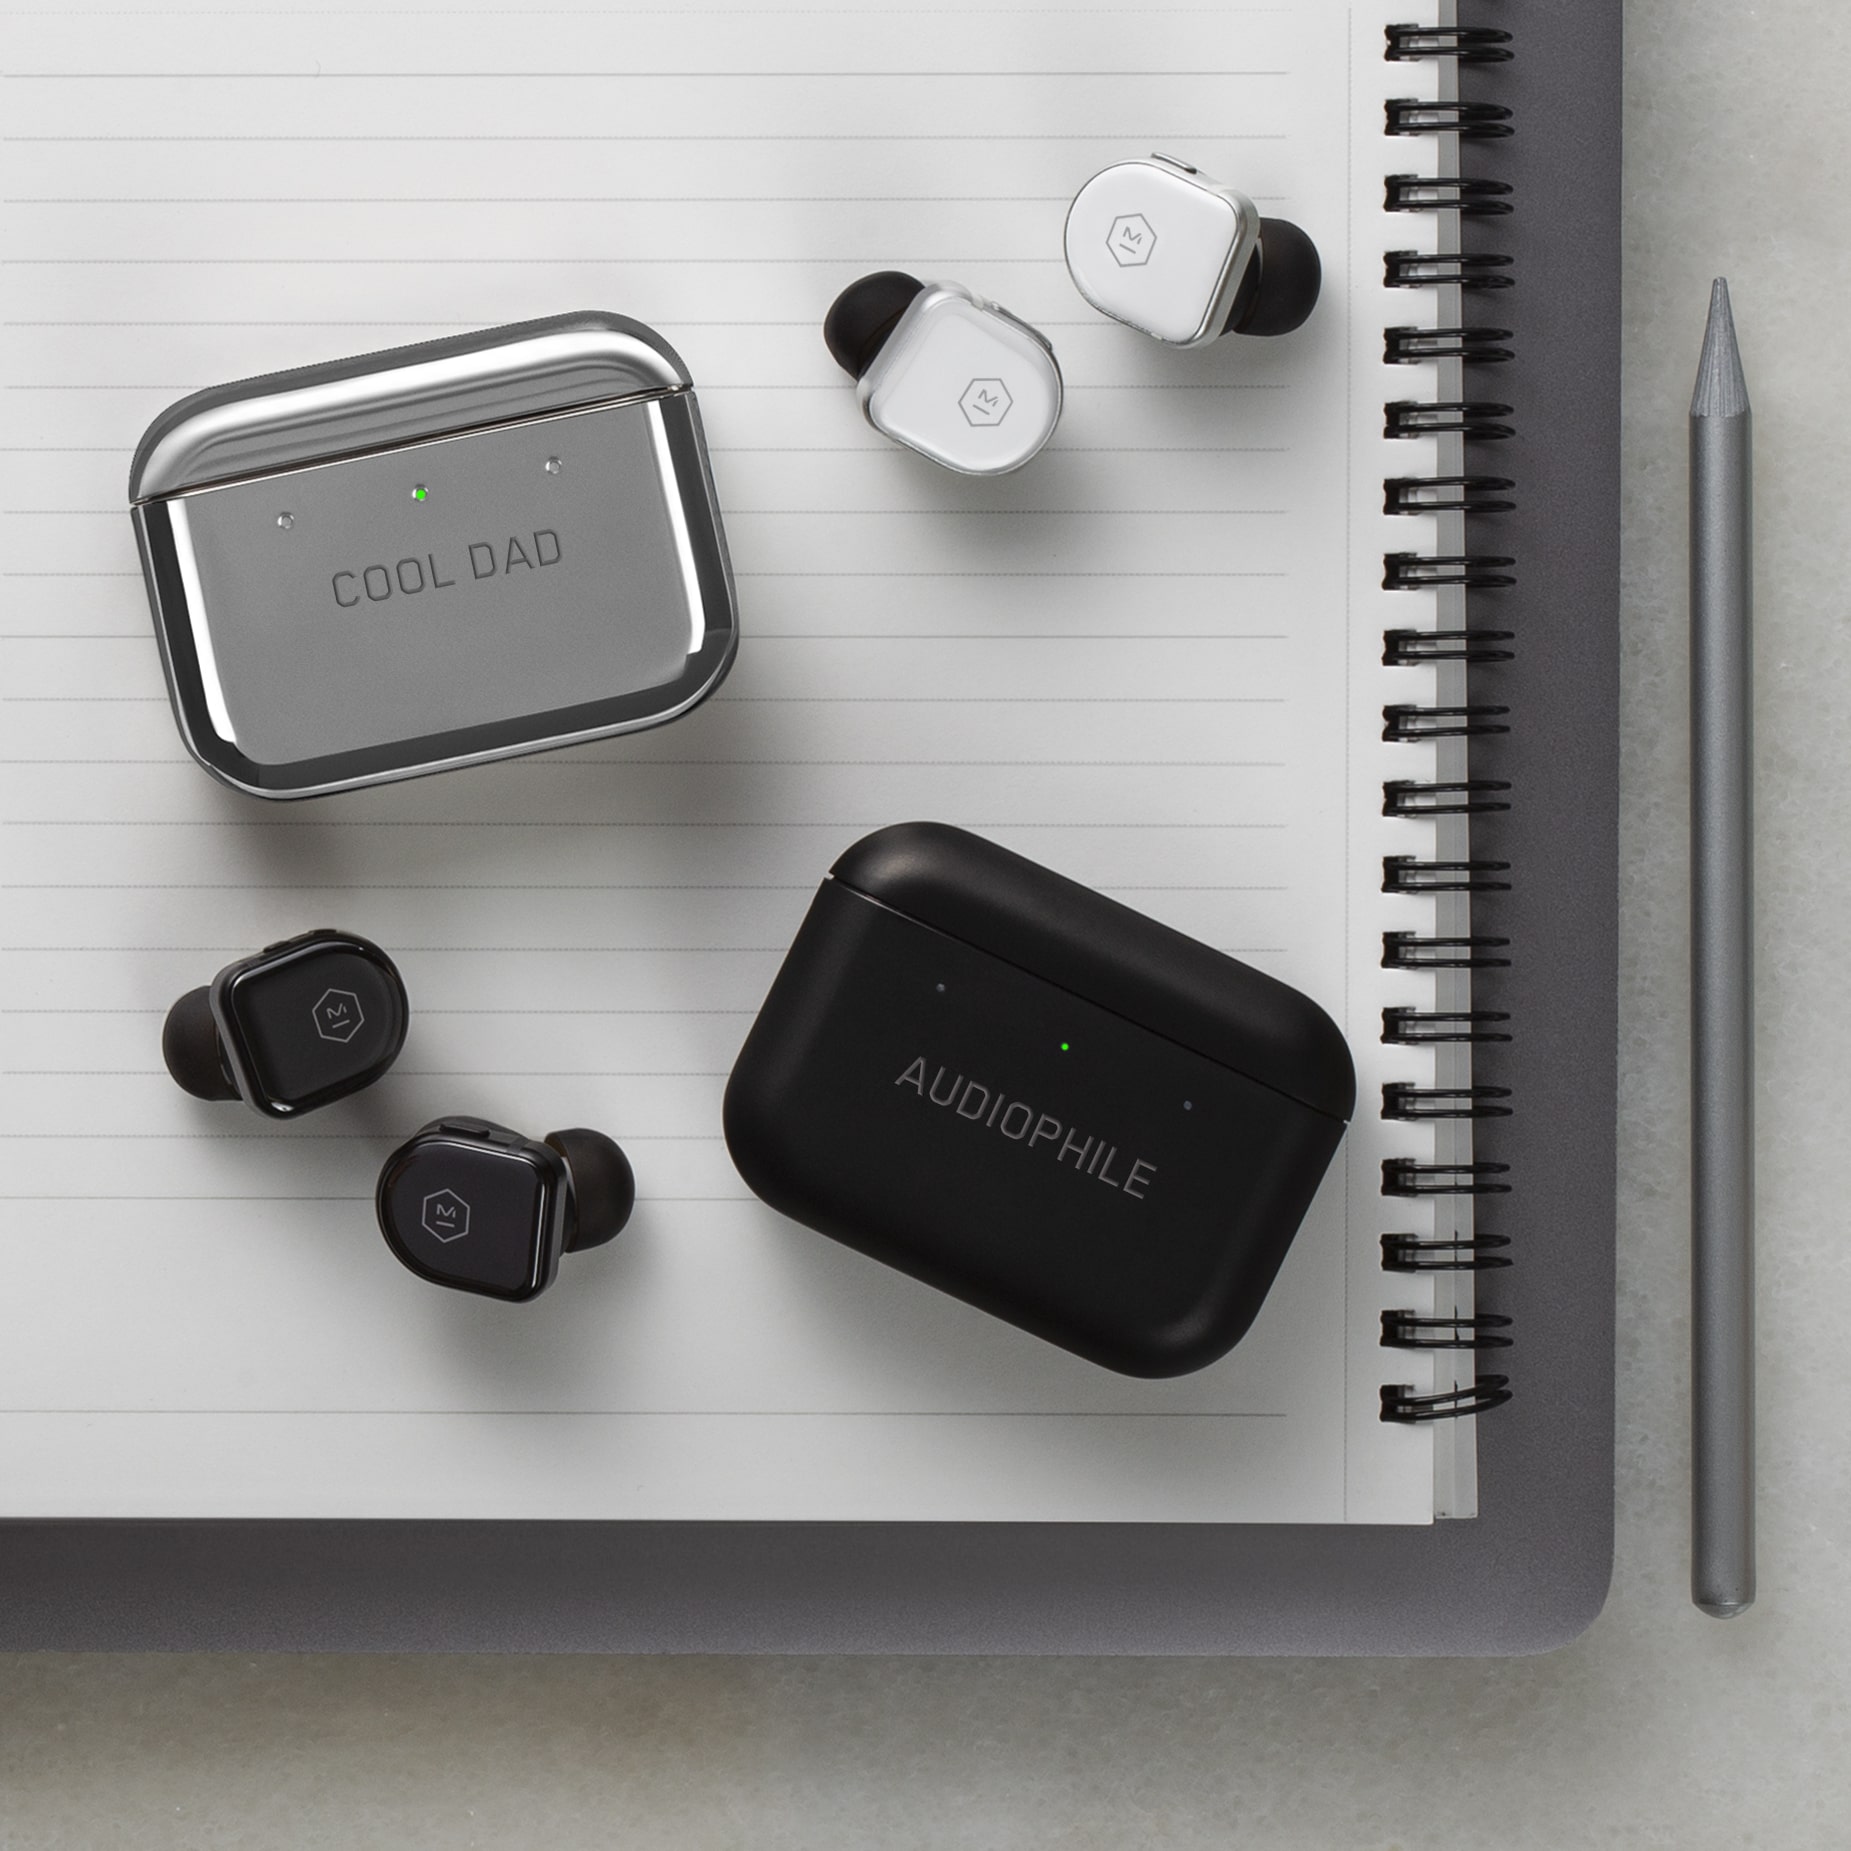 MW08 True Wireless Earphones in Black Ceramic and White Ceramic with engraved charging cases. 